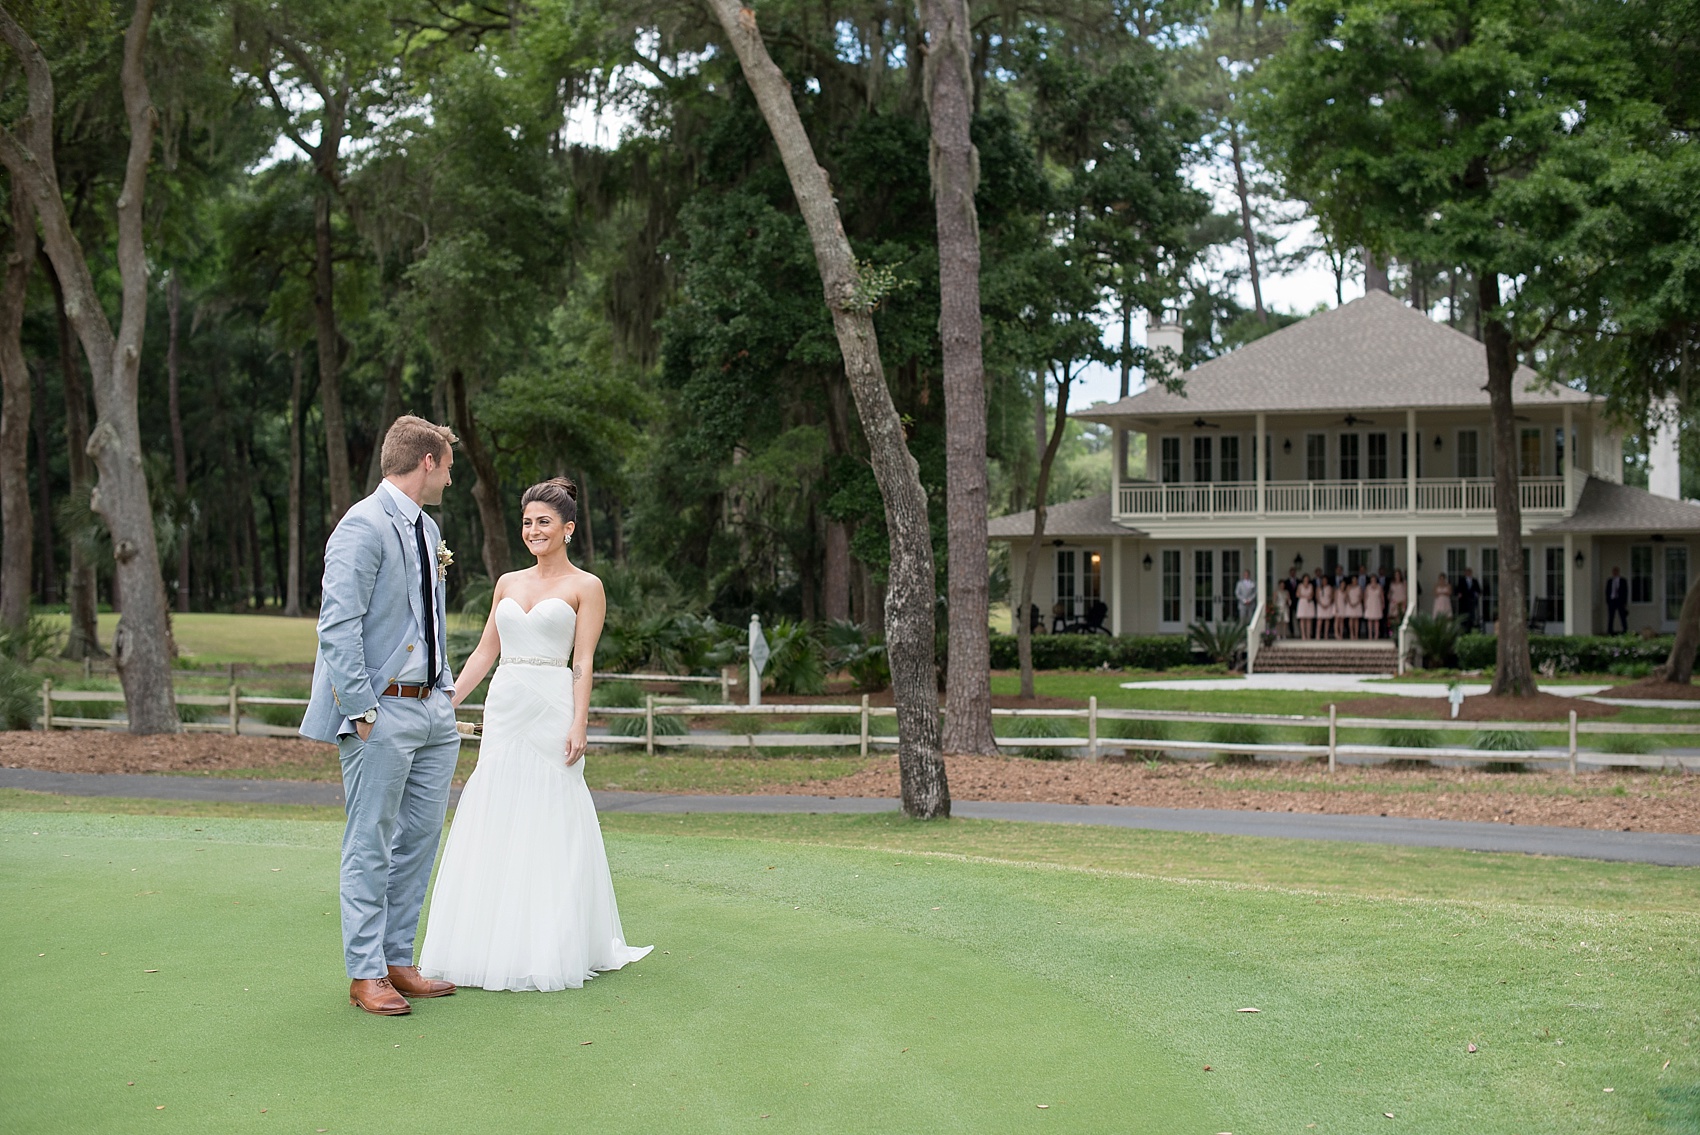 First look for the bride and groom on a golf course in Haig Point, South Carolina, off the coast of Hilton Head. Photos by Mikkel Paige Photography.